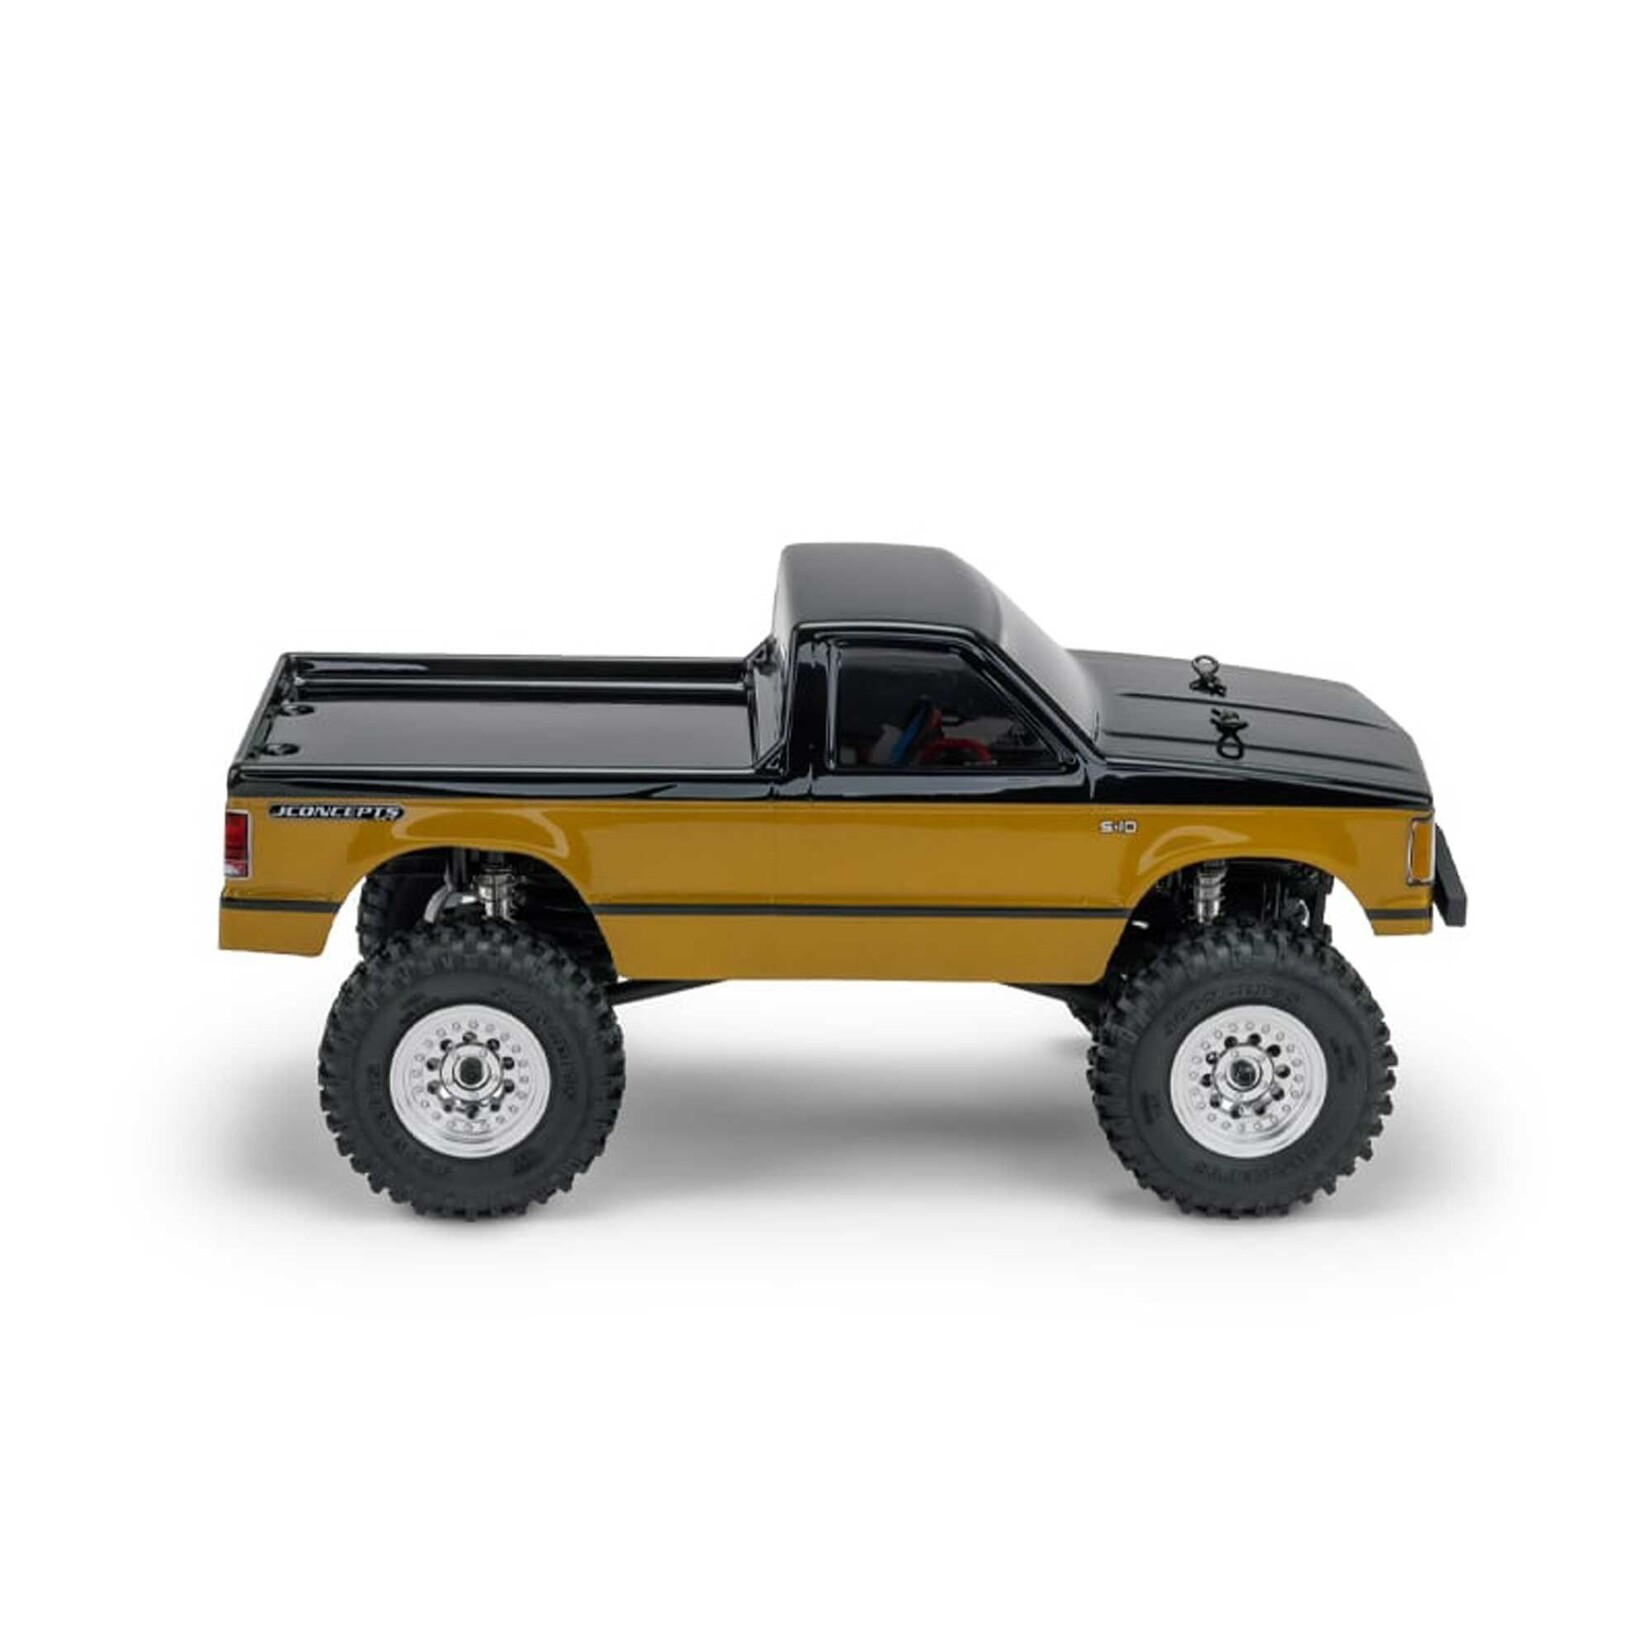 JConcepts 1990 Chevy S10, Axial SCX24 Body #0494